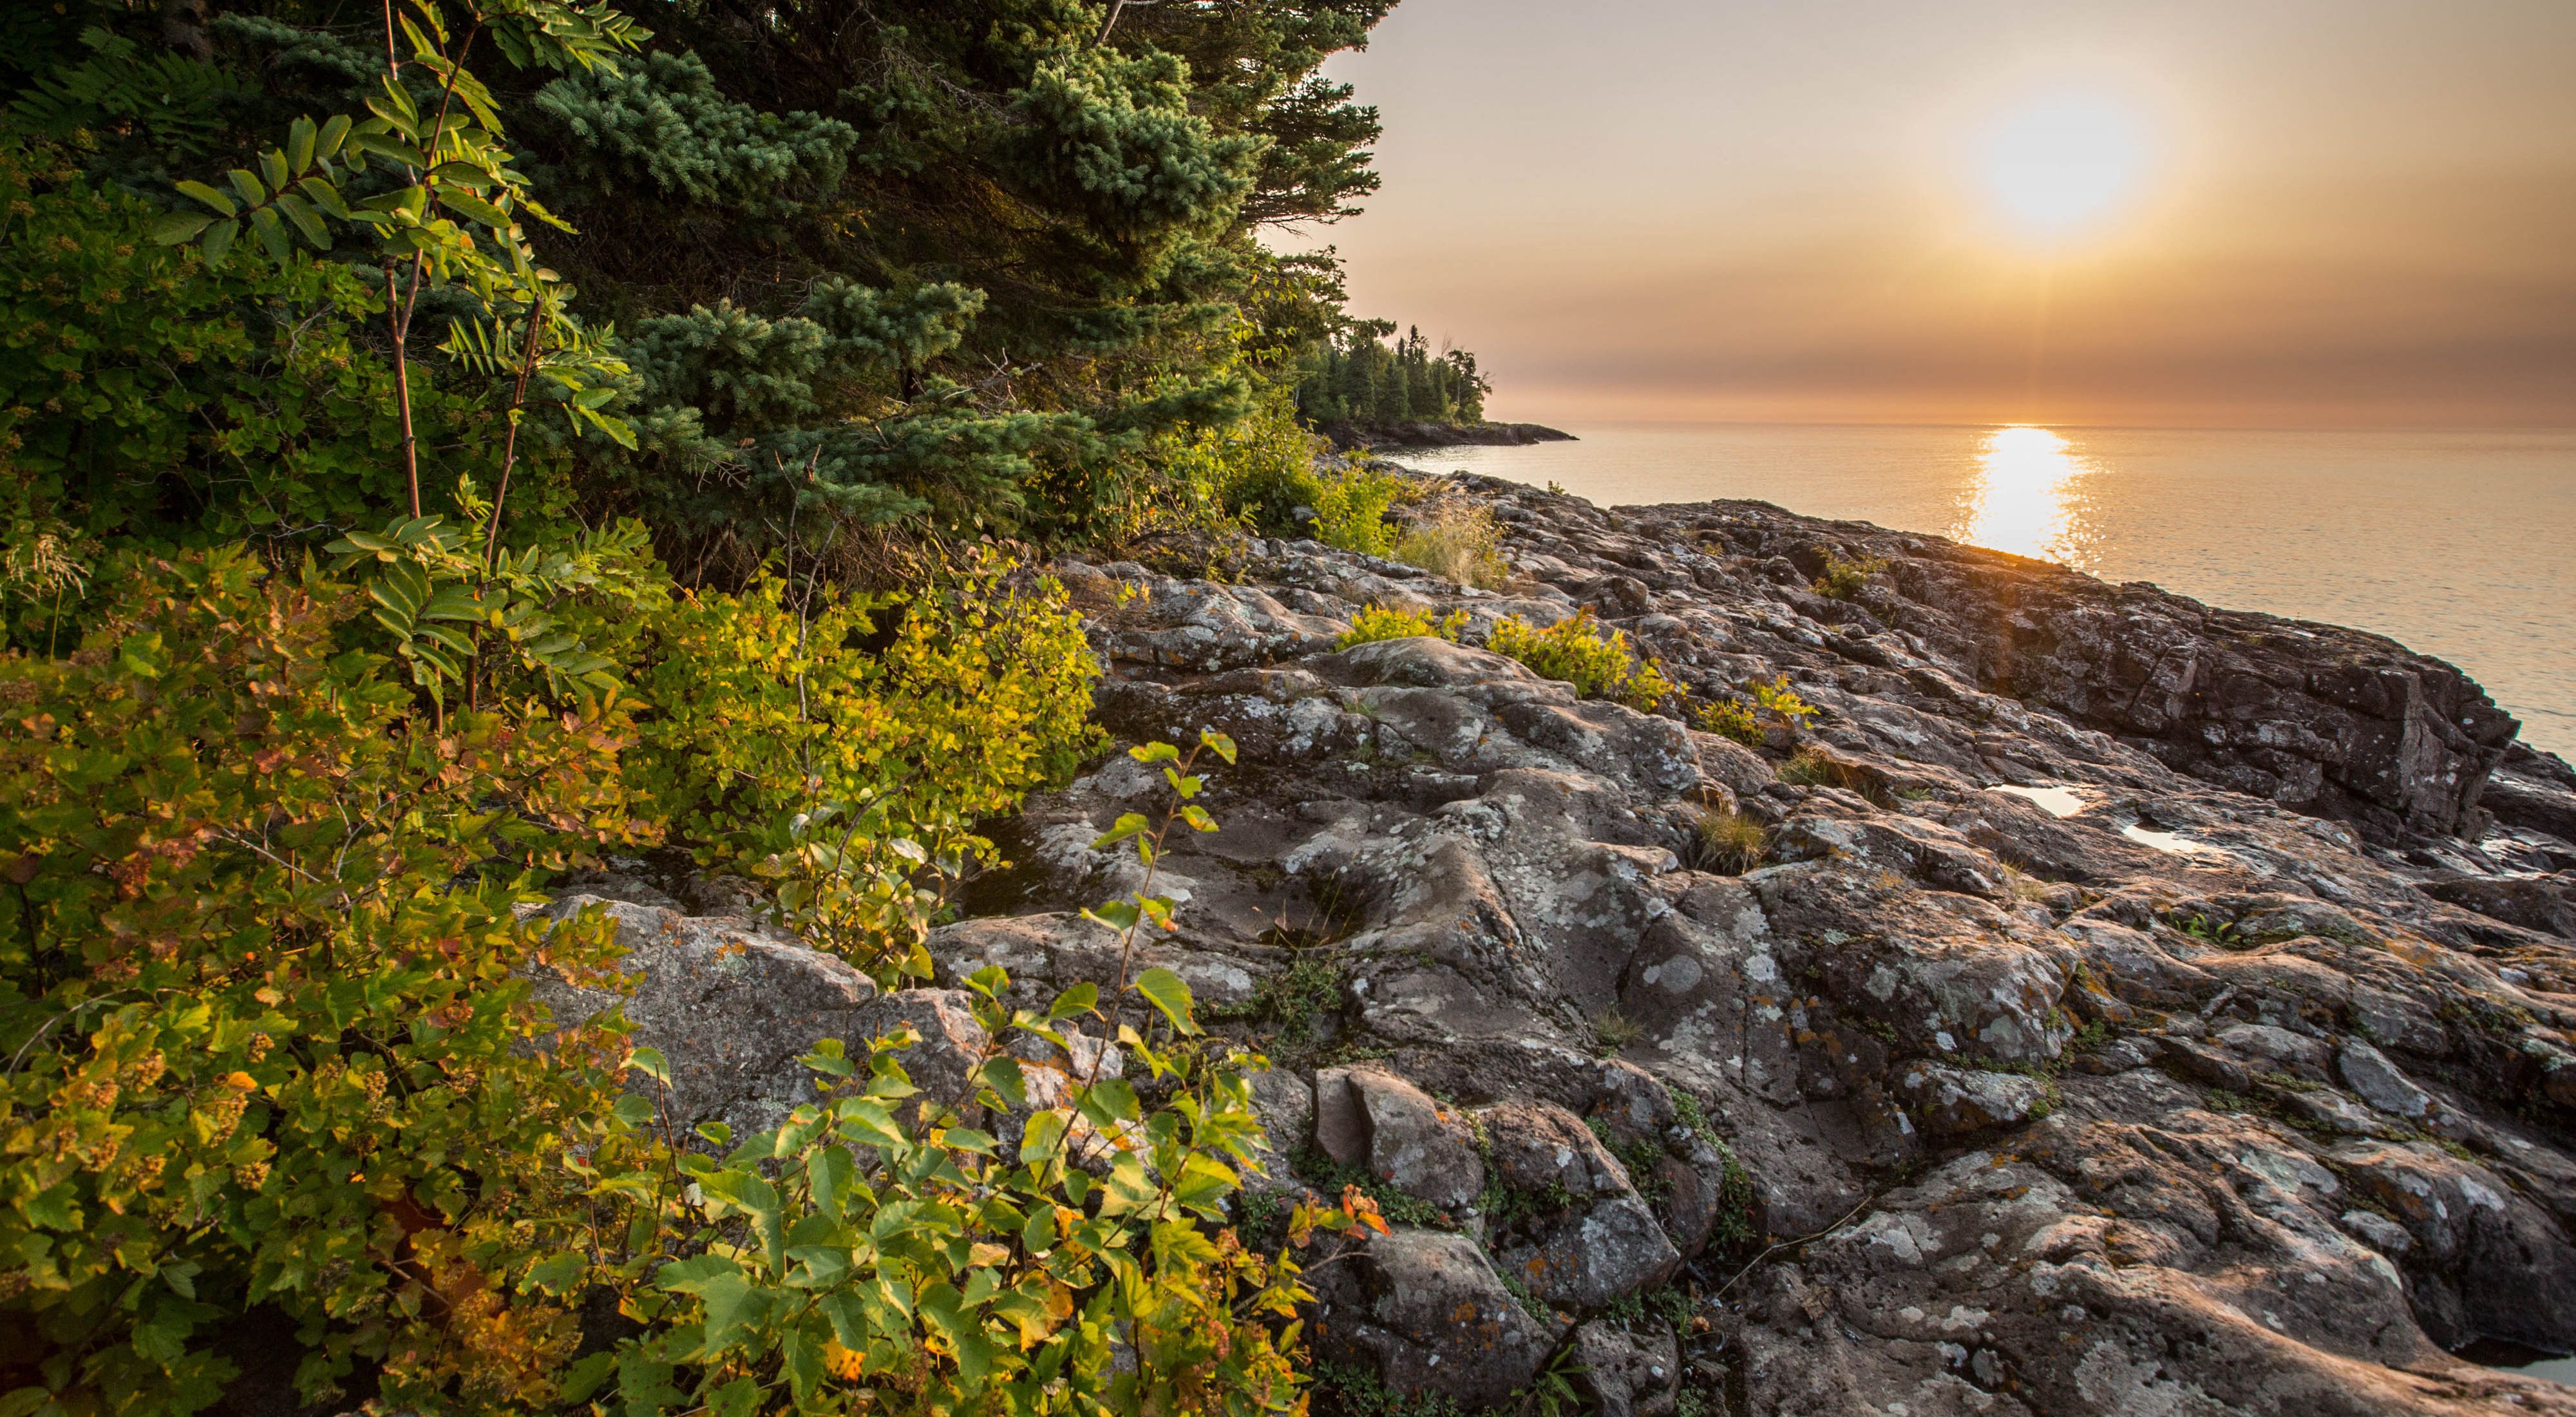 The glow of sunset over a tranquil lake with rocky, rugged, forested shoreline in the foreground.